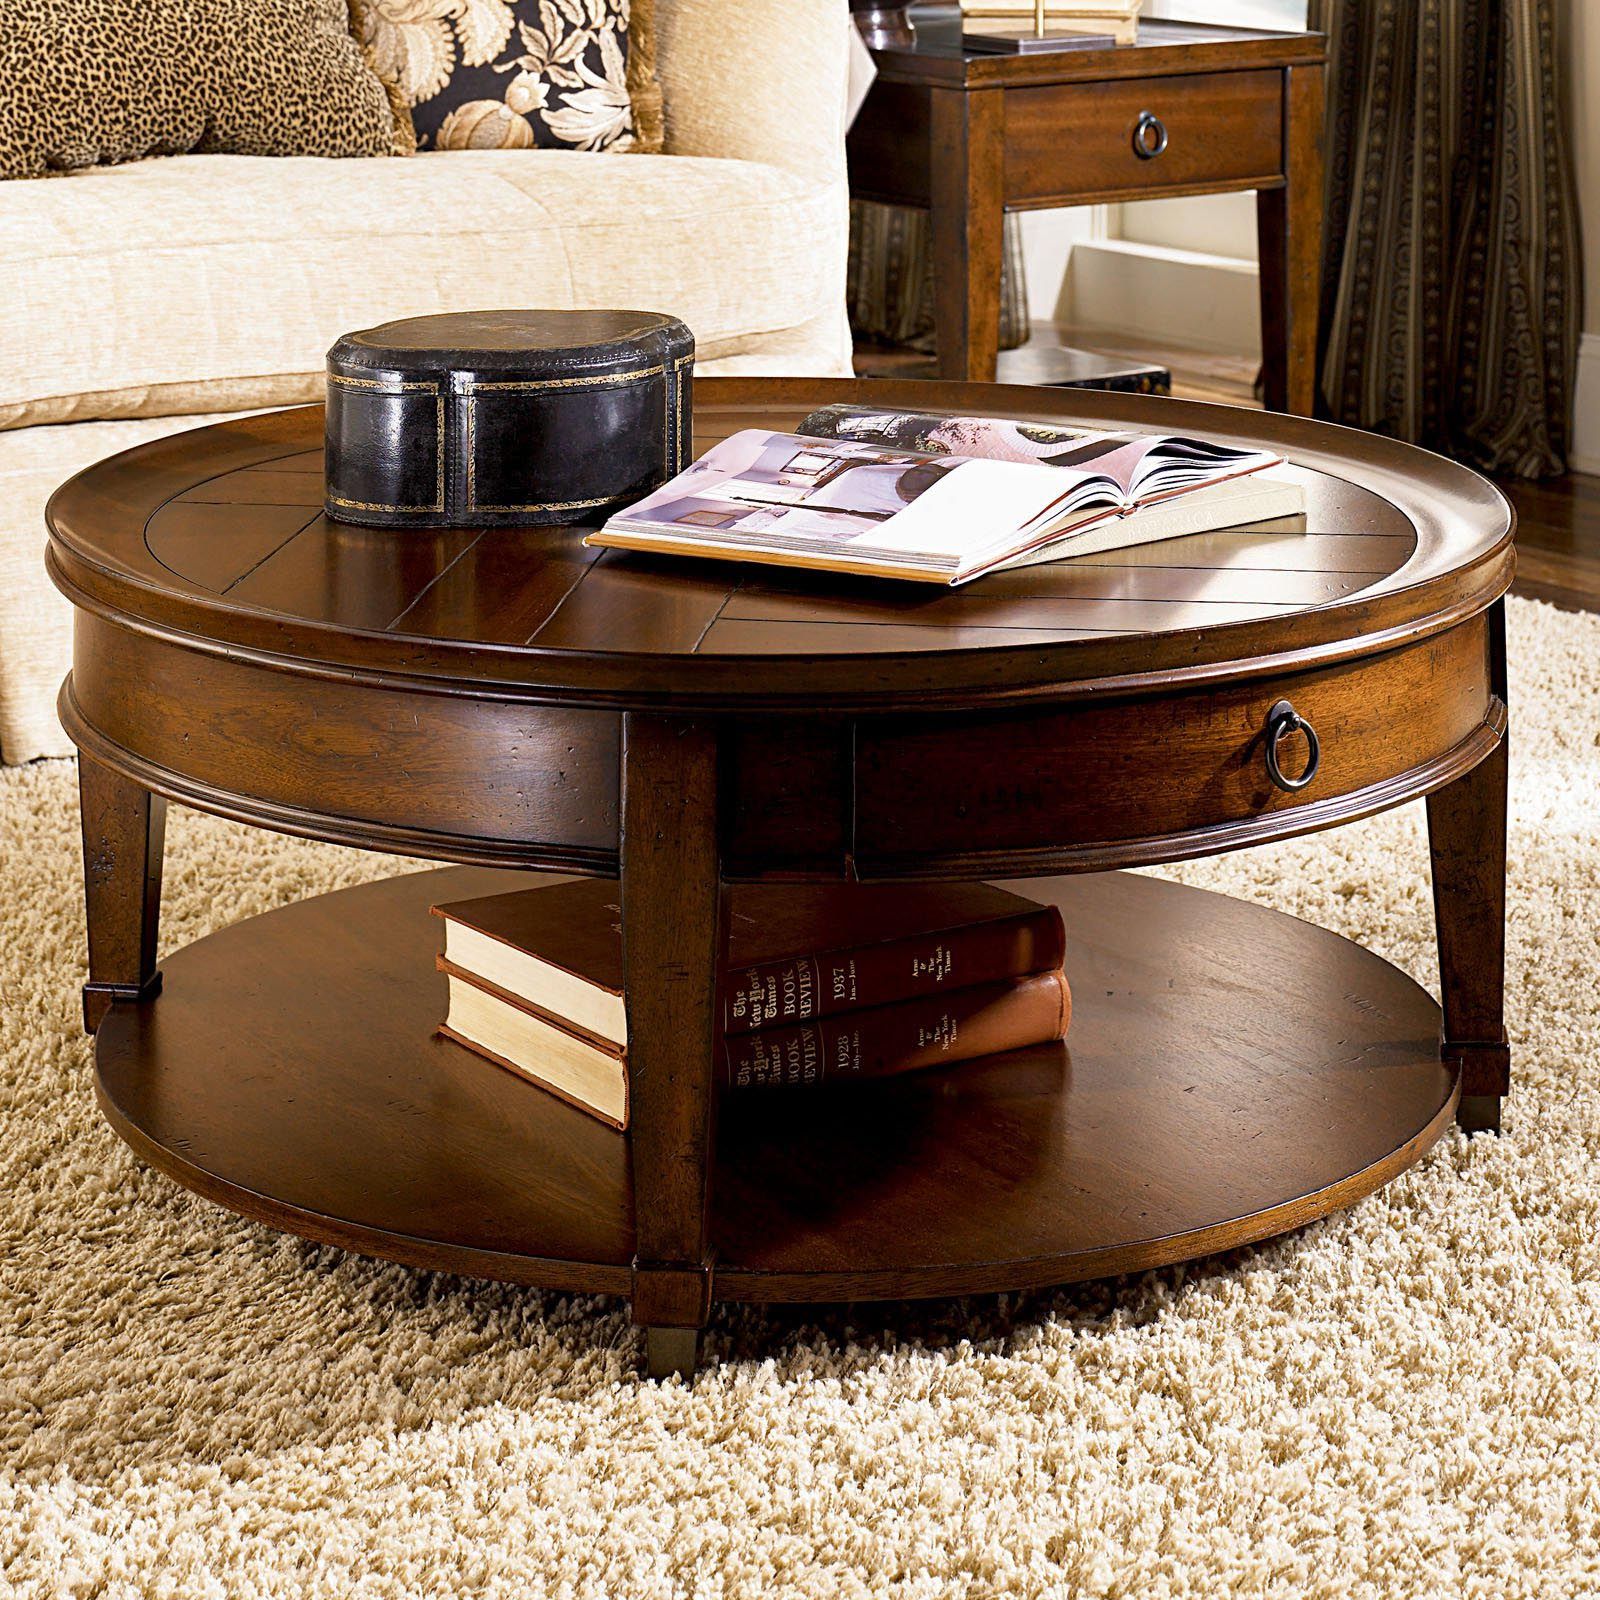 Round Mahogany Coffee Table | Coffee Table Design Ideas For Coffee Tables With Round Wooden Tops (View 18 of 20)